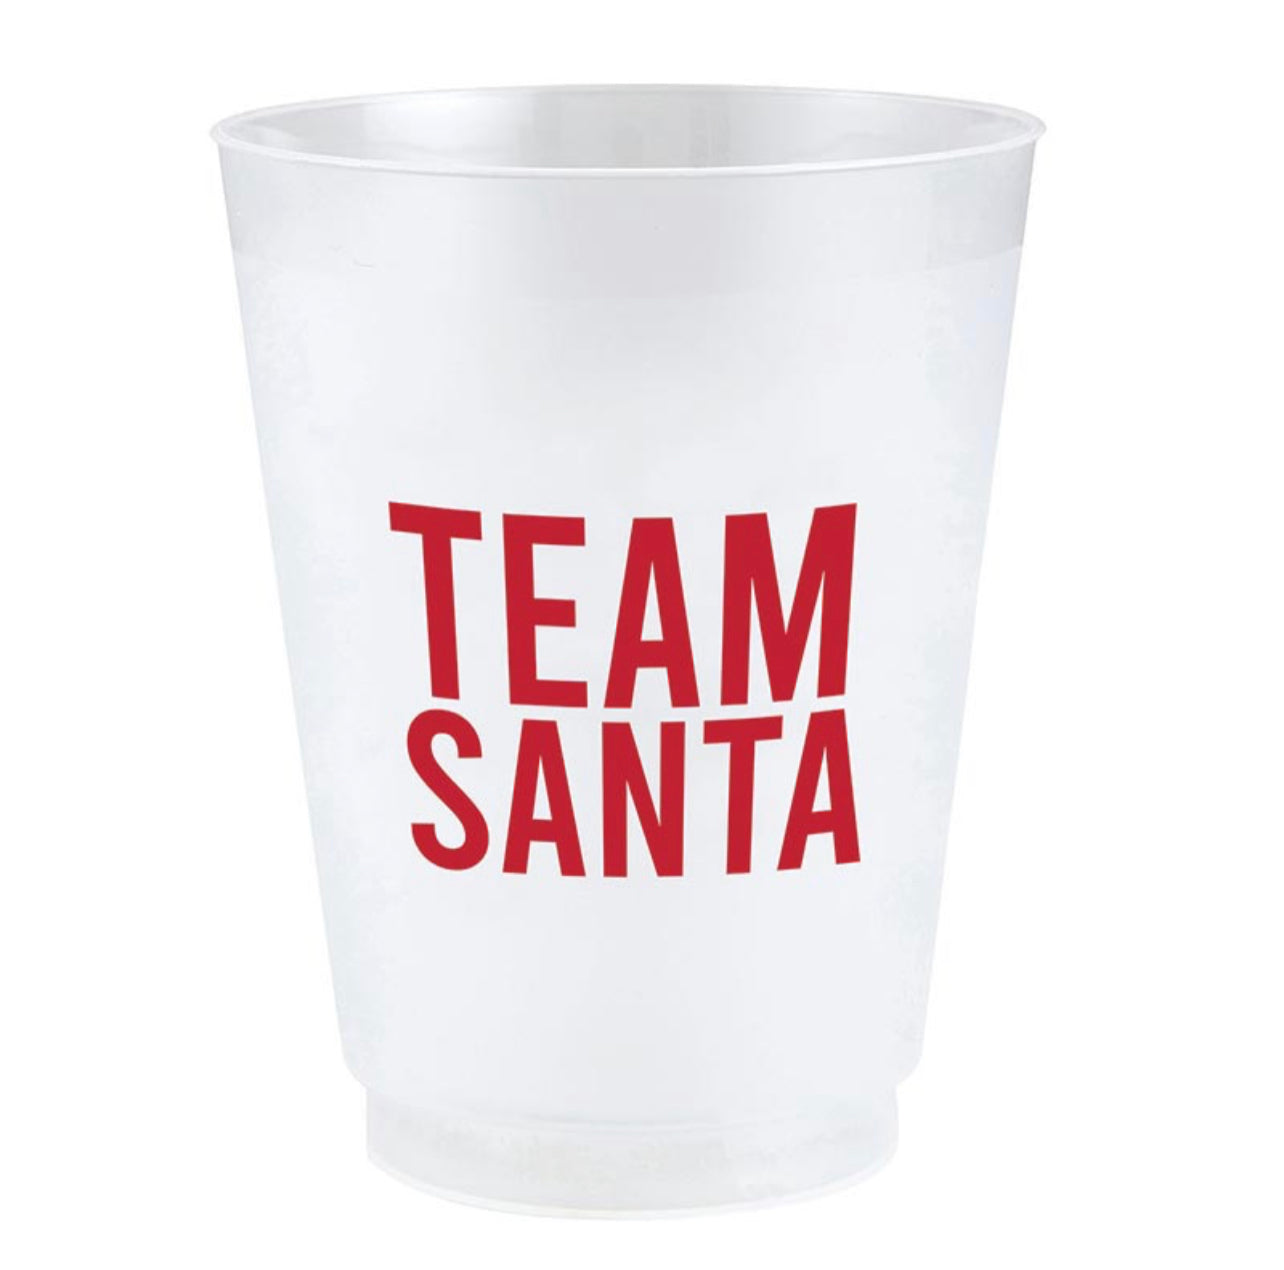 white frosted plastic christmas cup with red script that reads "team santa"